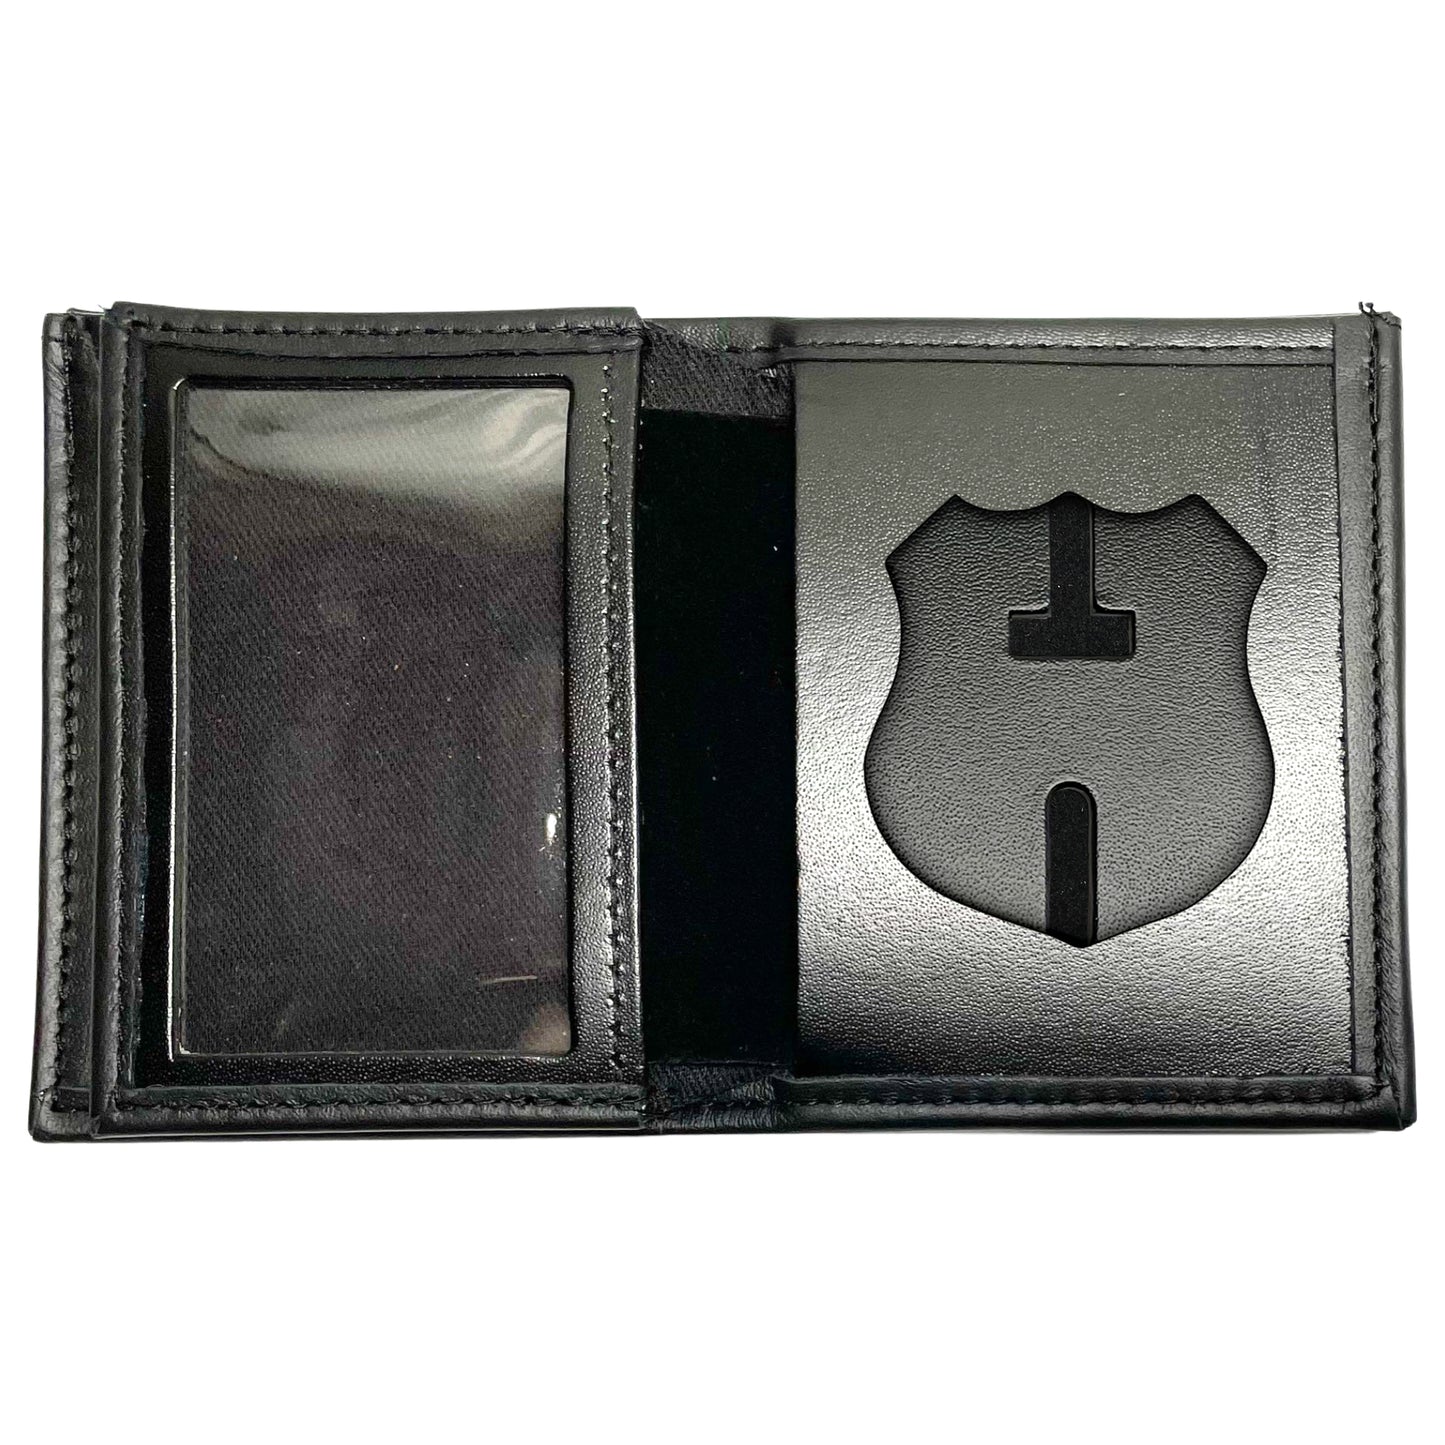 Department of Fishery and Oceans Canada Badge Wallet